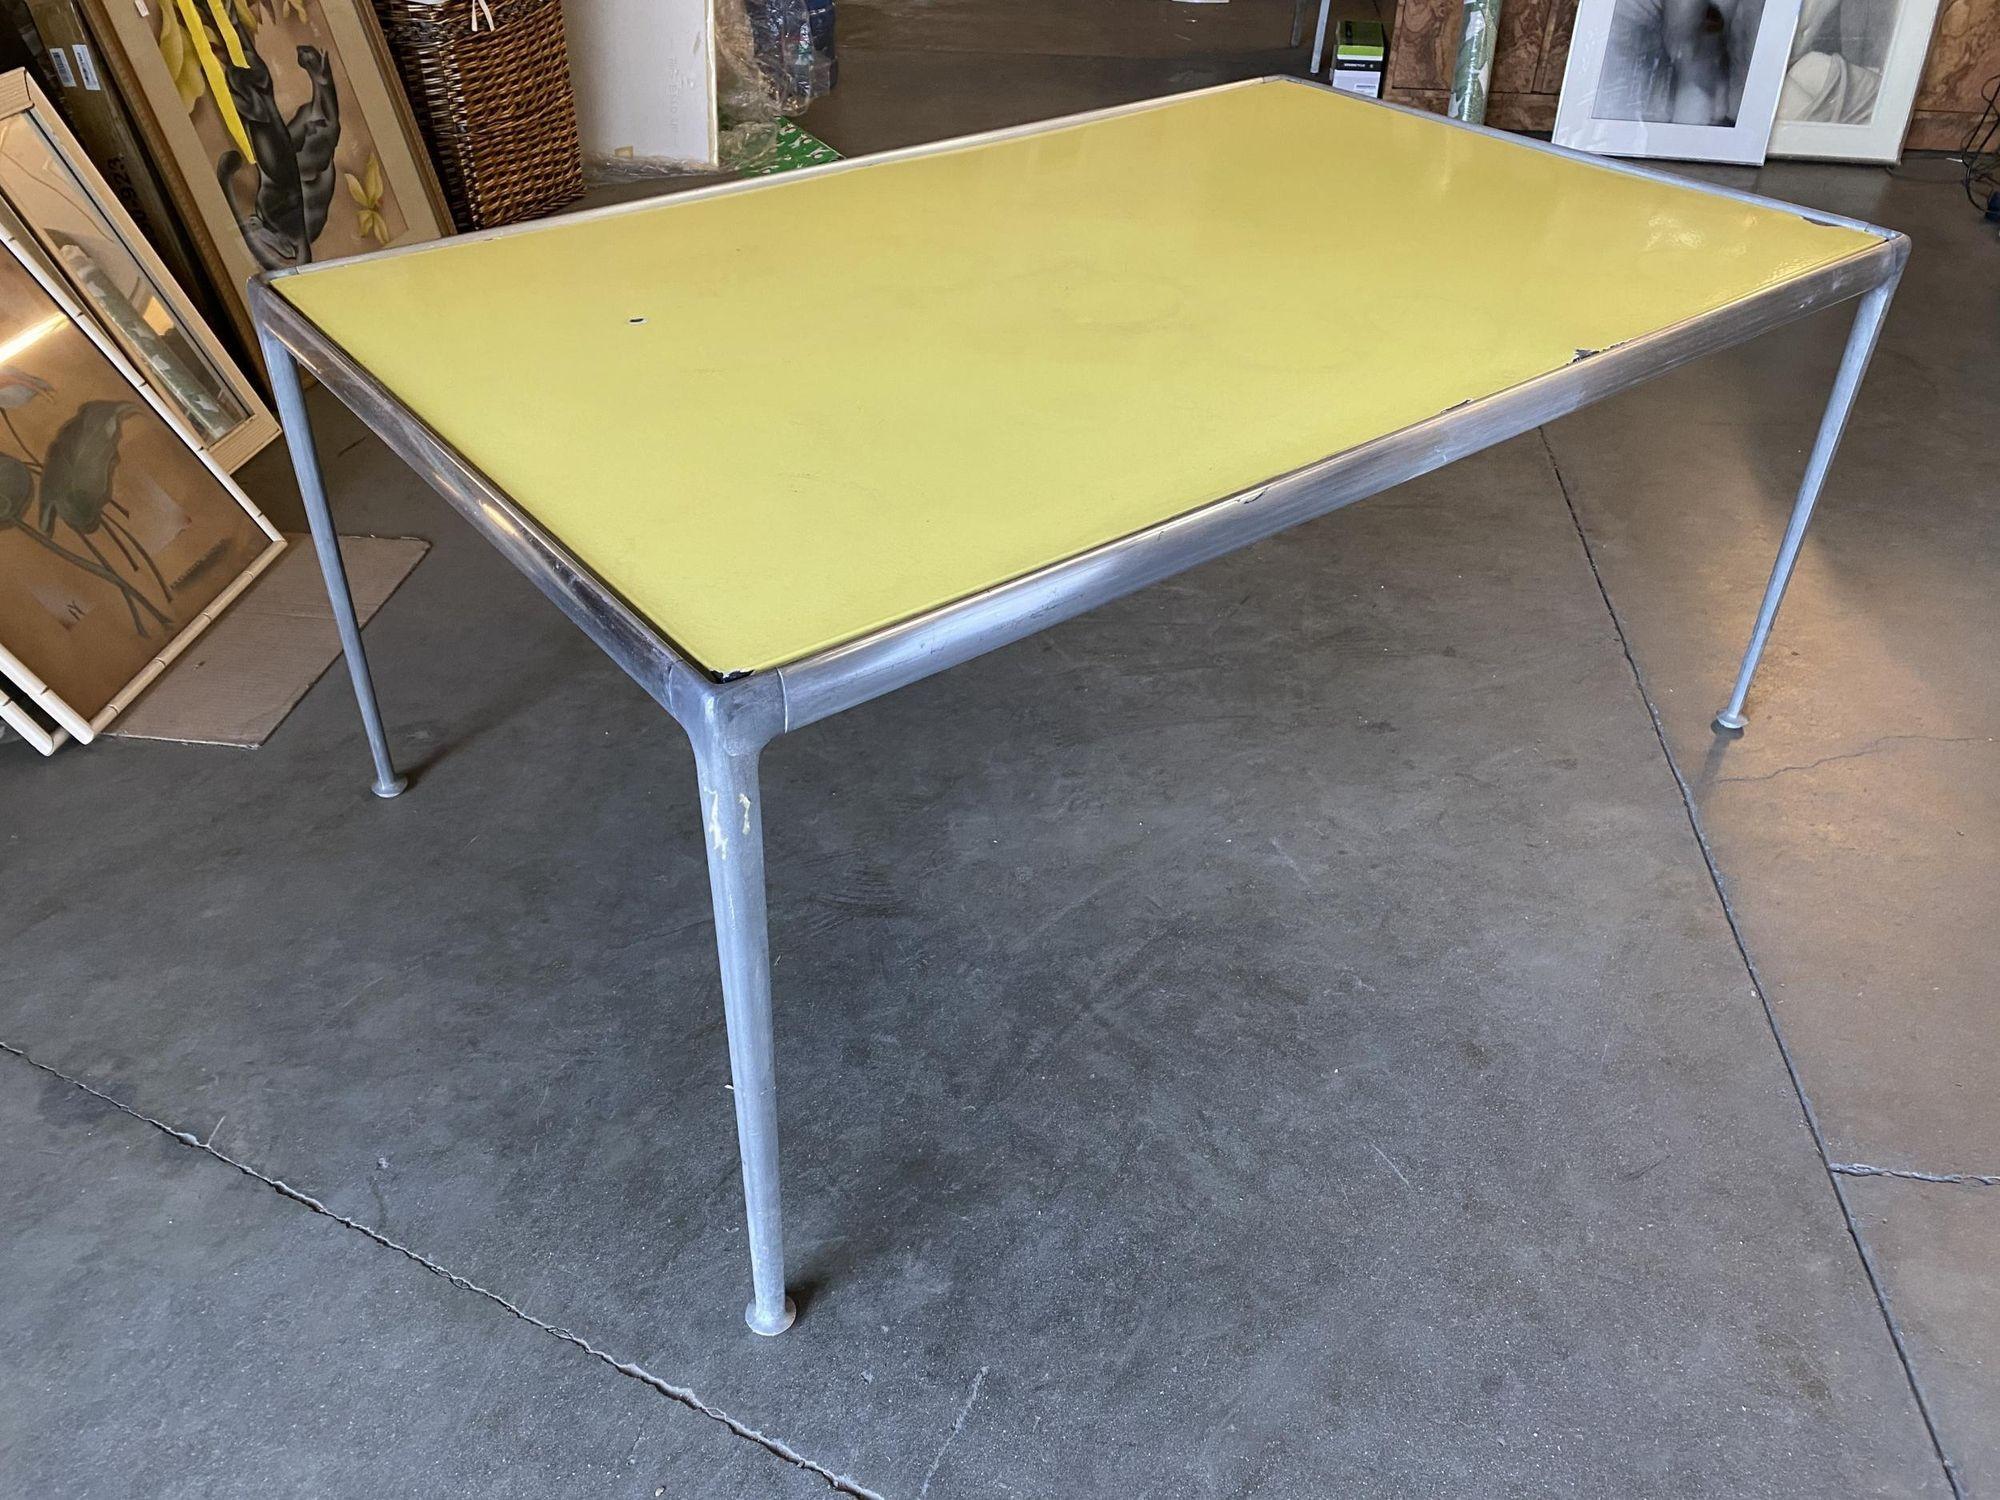 Rare Aluminum Midcentury Dining Table by Richard Shultz, circa 1966 For Sale 5